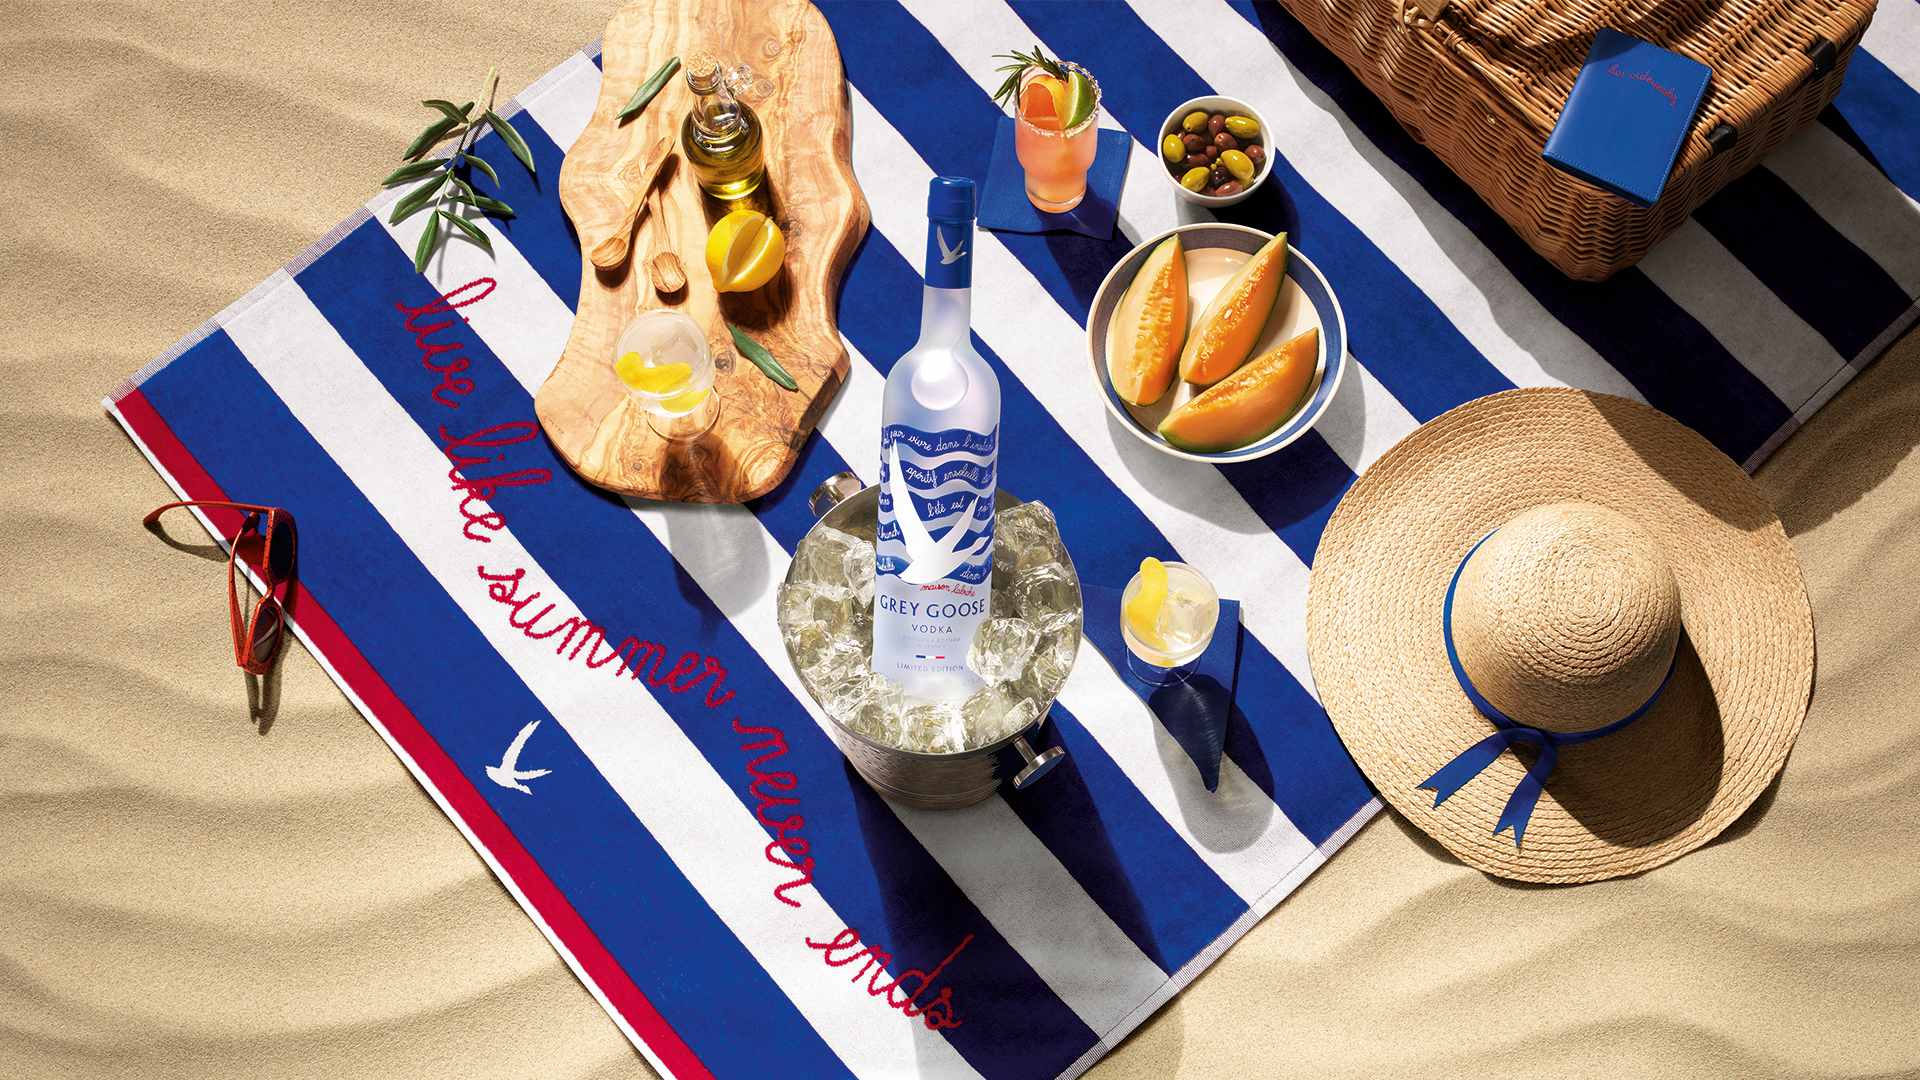 Blue and white striped towel with Grey Goose bottle of vodka and snacks